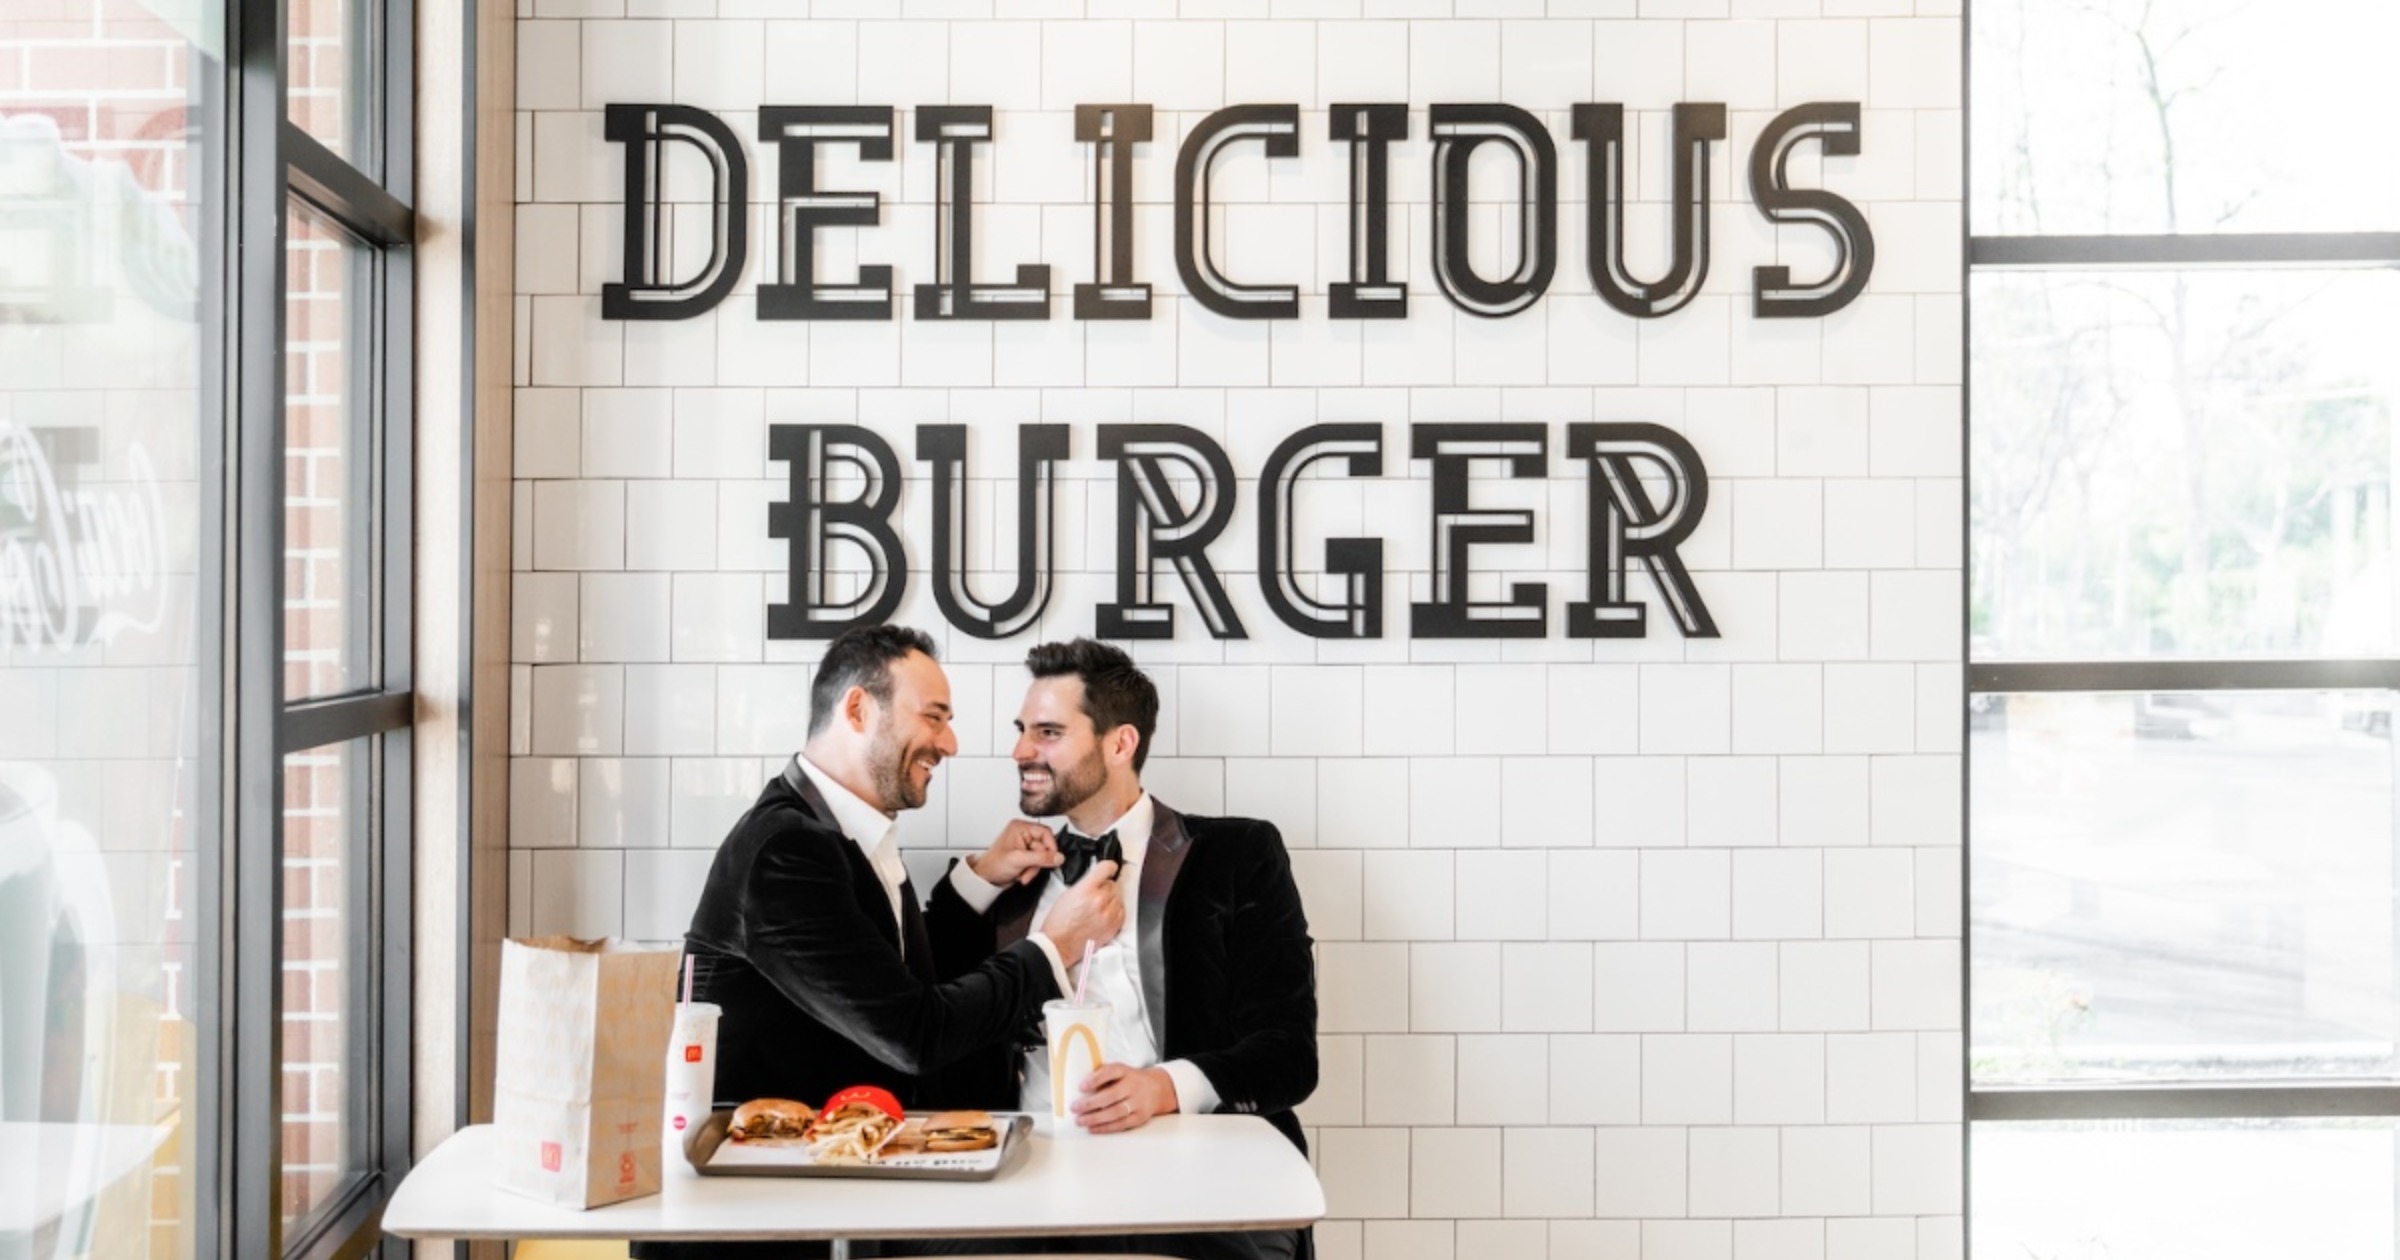 This Custom McDonald's Engagement Shoot Was All About Personality